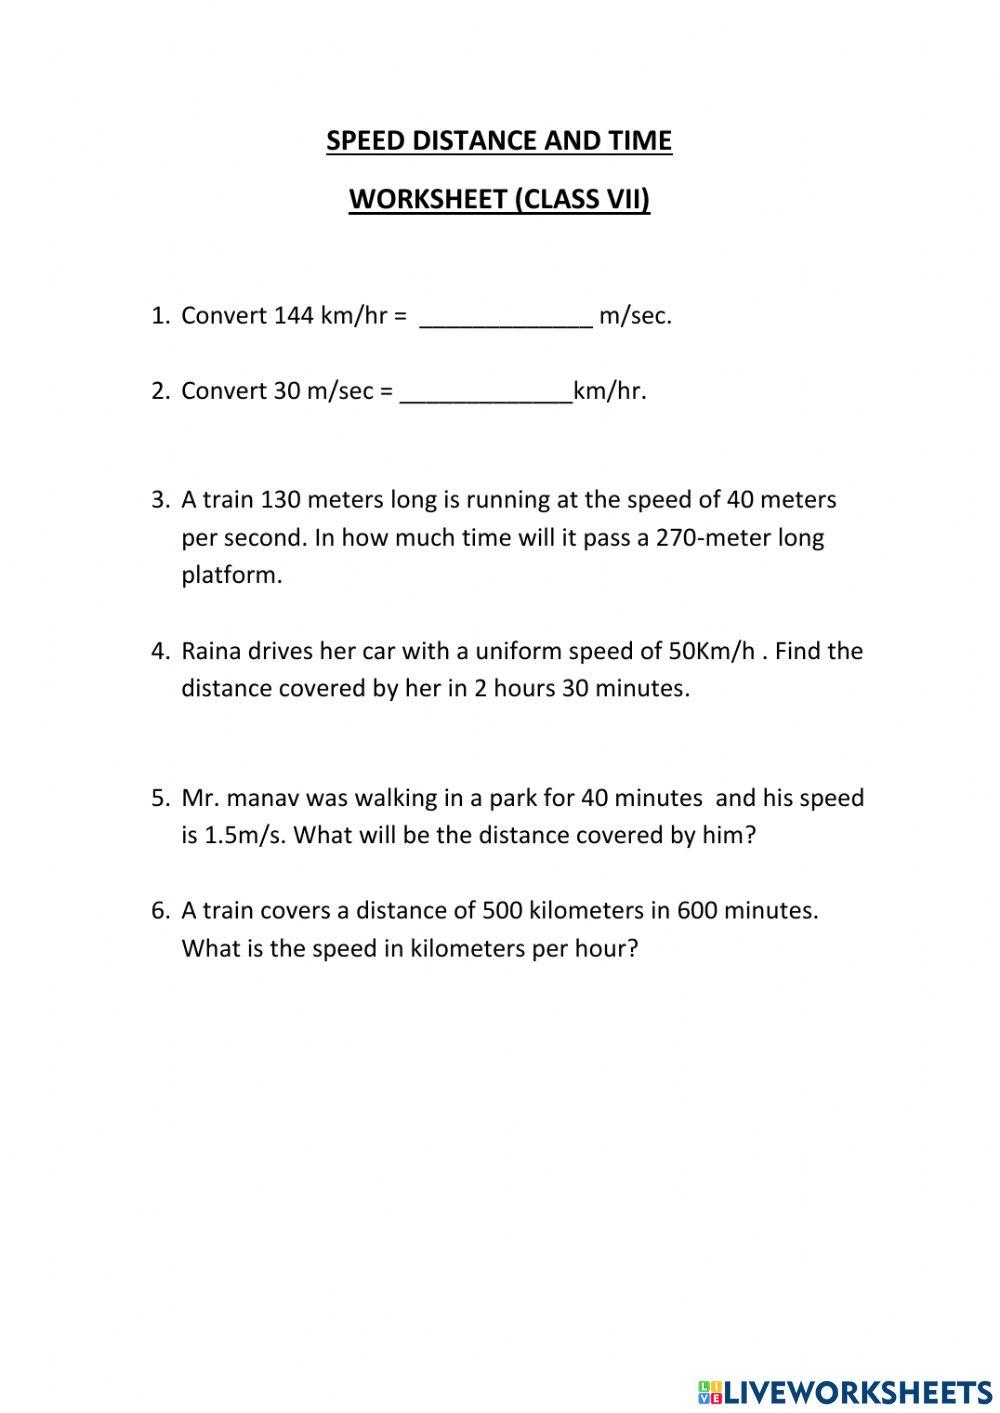 Speed Time And Distance Worksheet in 2023  Time worksheets, Worksheets,  Math practice worksheets